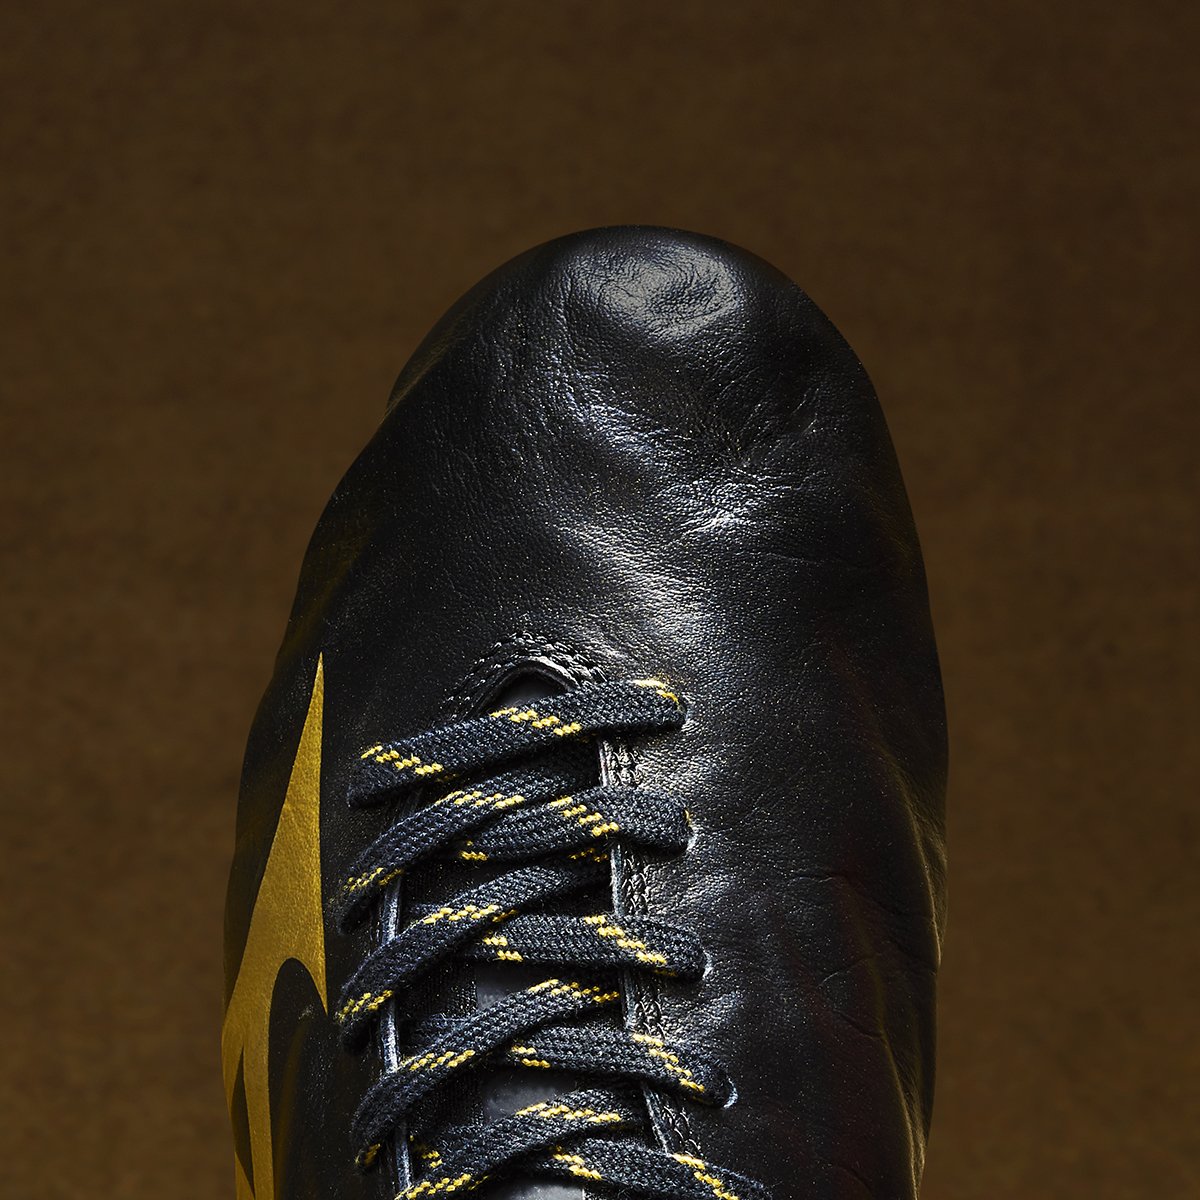 Made in Japan. Owned across the globe. Brand new Rebula 2 V1 in Gold colourway. Get them today 🏆⚽#PowerToPerform